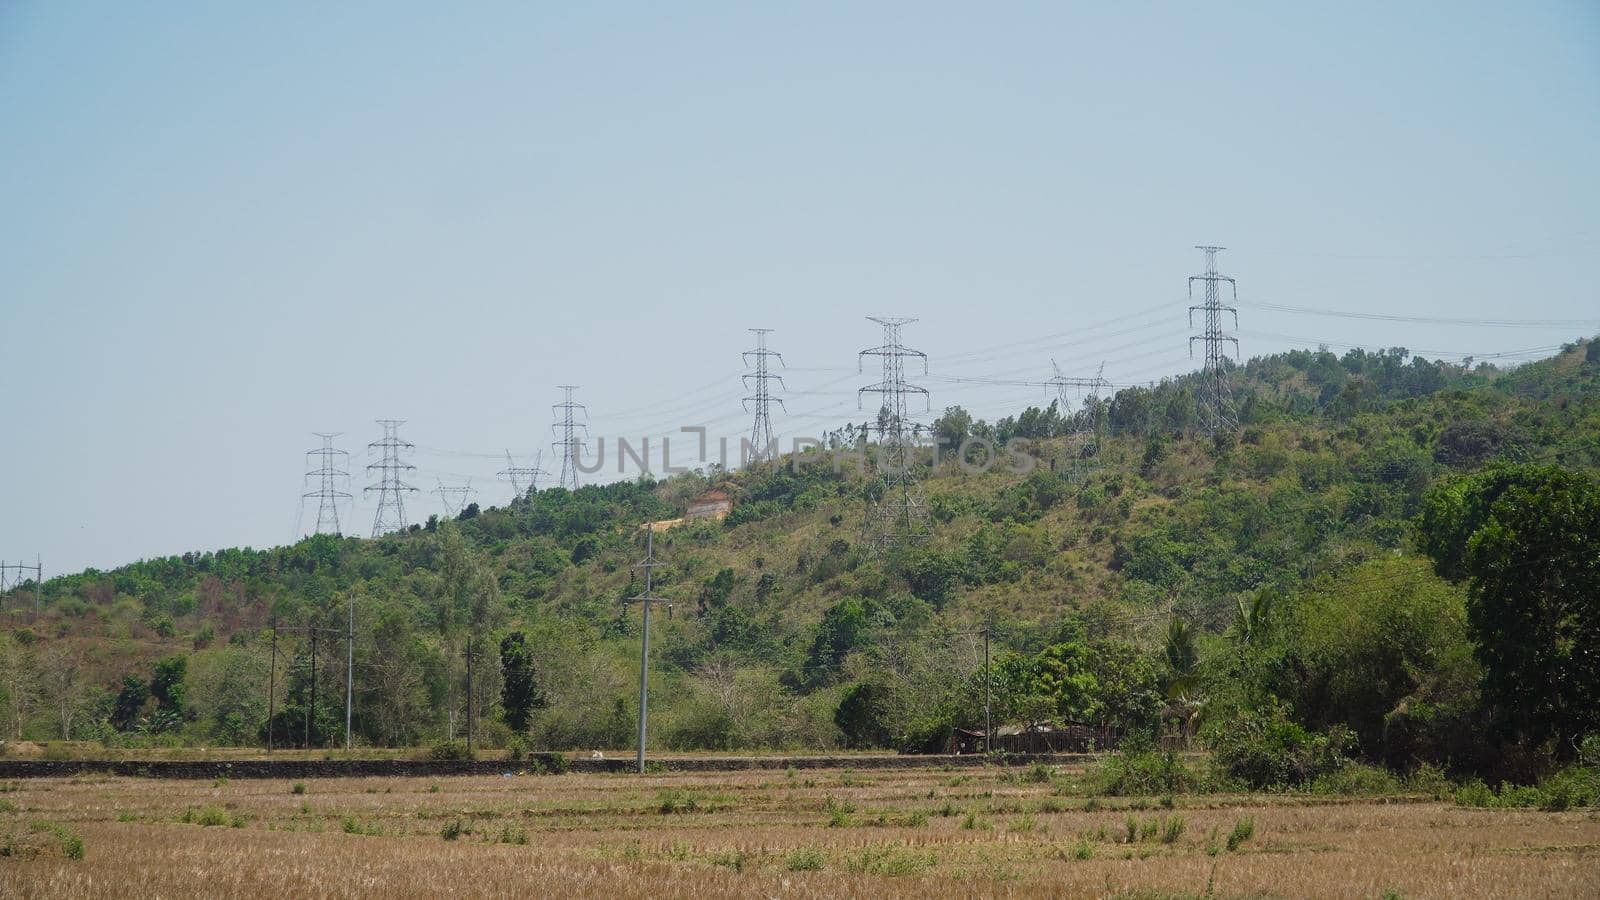 Power pylons and high voltage lines passing through mountain cordillera. Philippines, Luzon. High voltage metal post, tower. Electric Power Transmission Lines over trees.